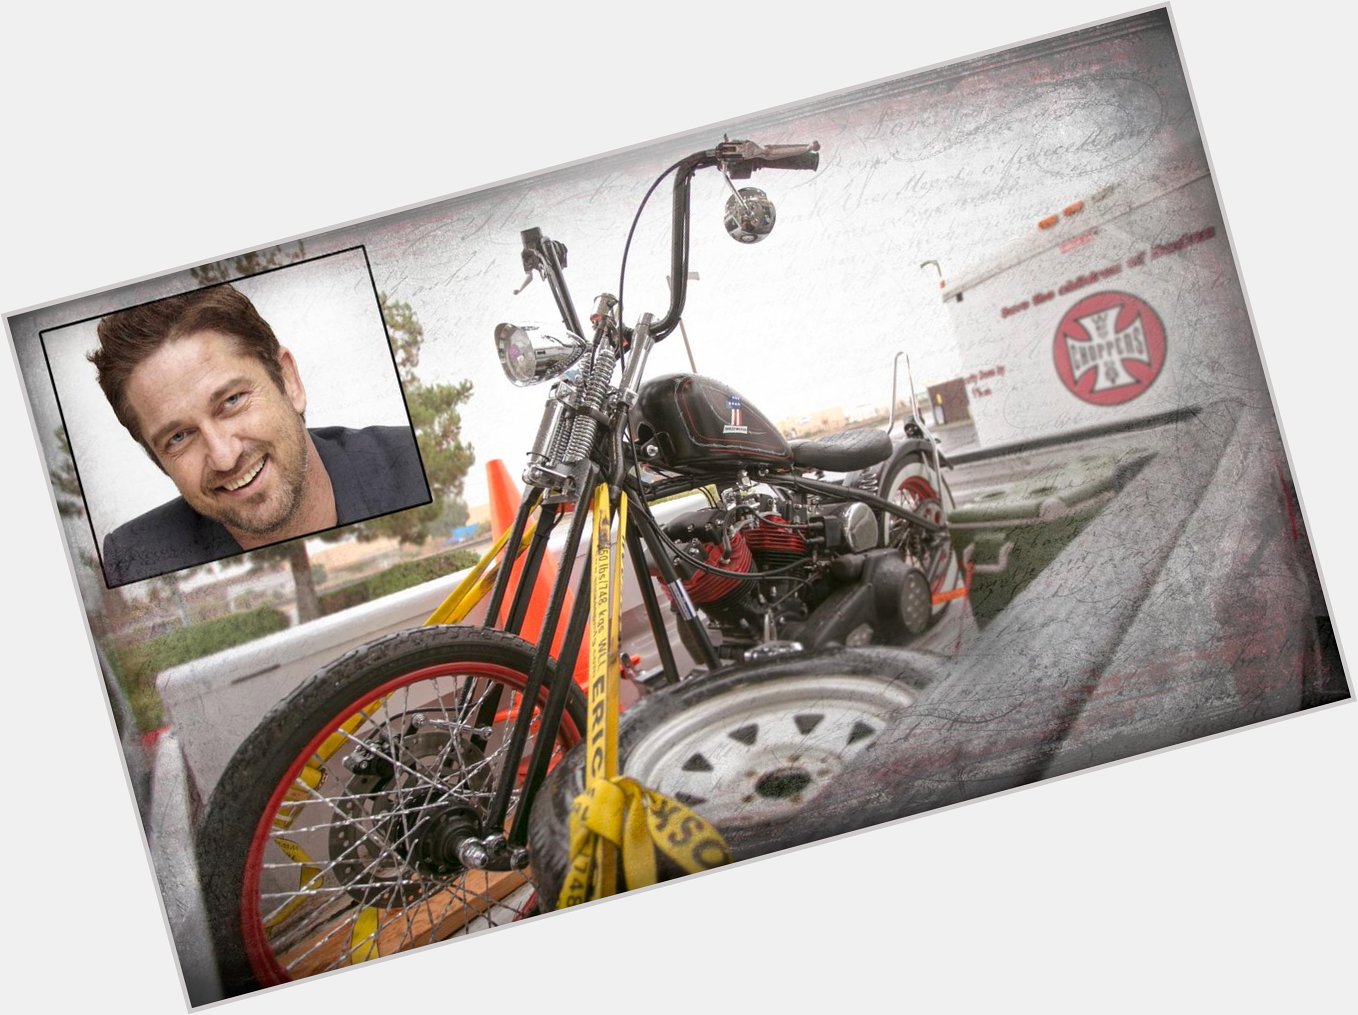 Gerard Butler HAPPY BIRTHDAY! & on your SPECIAL day u gave us a gift U donated your MGP rat bike back 2 our children 